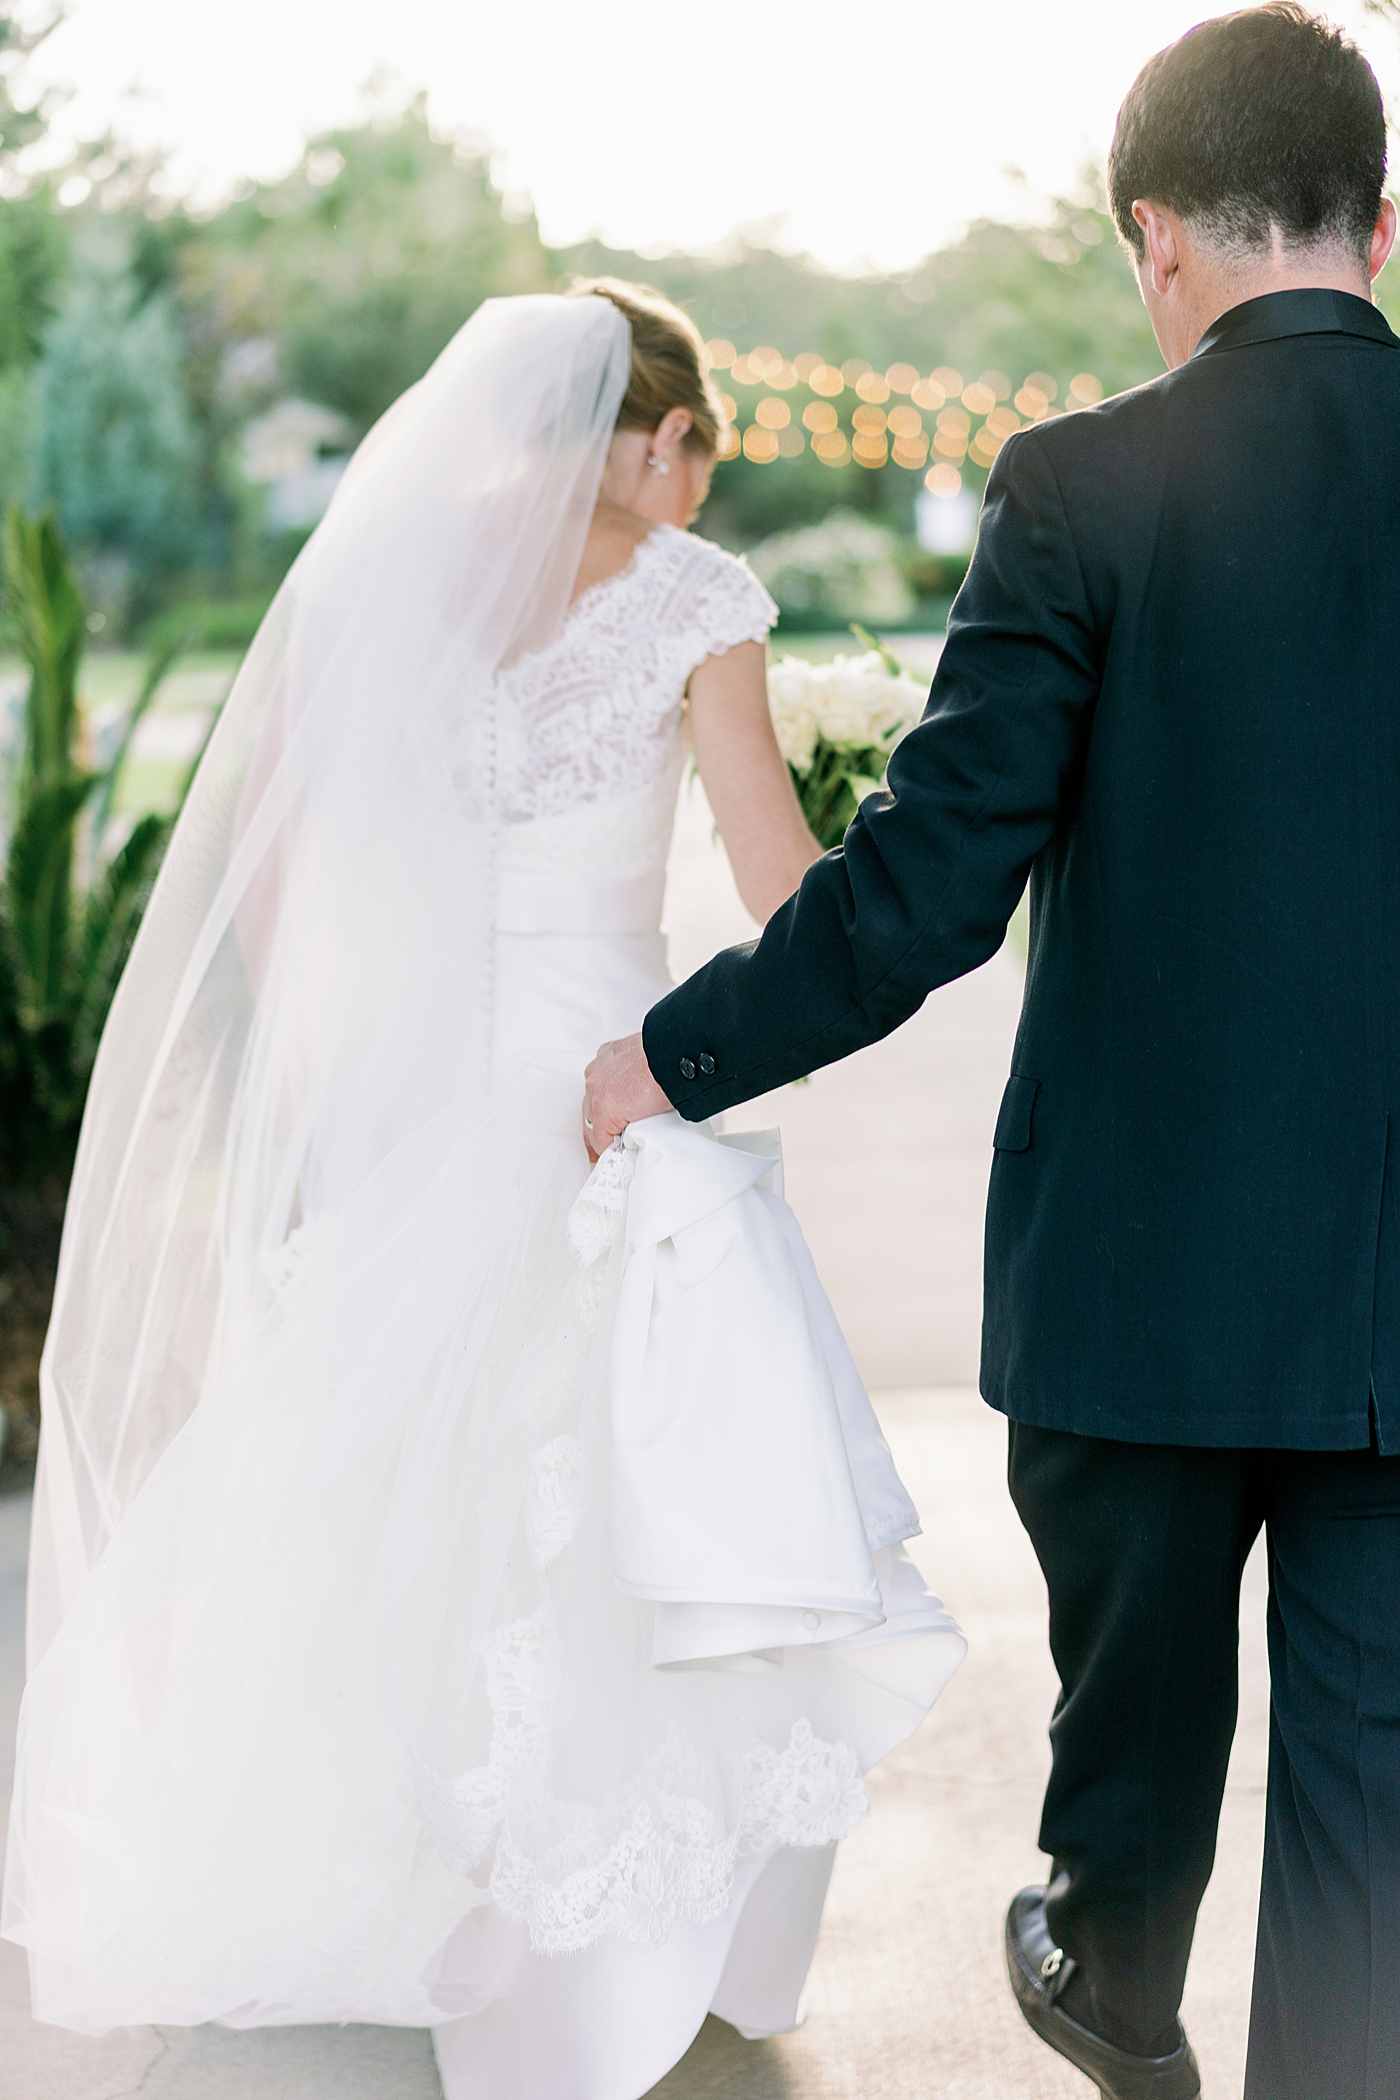 Bride and groom walking to their reception | Image by Annie Laura Photo